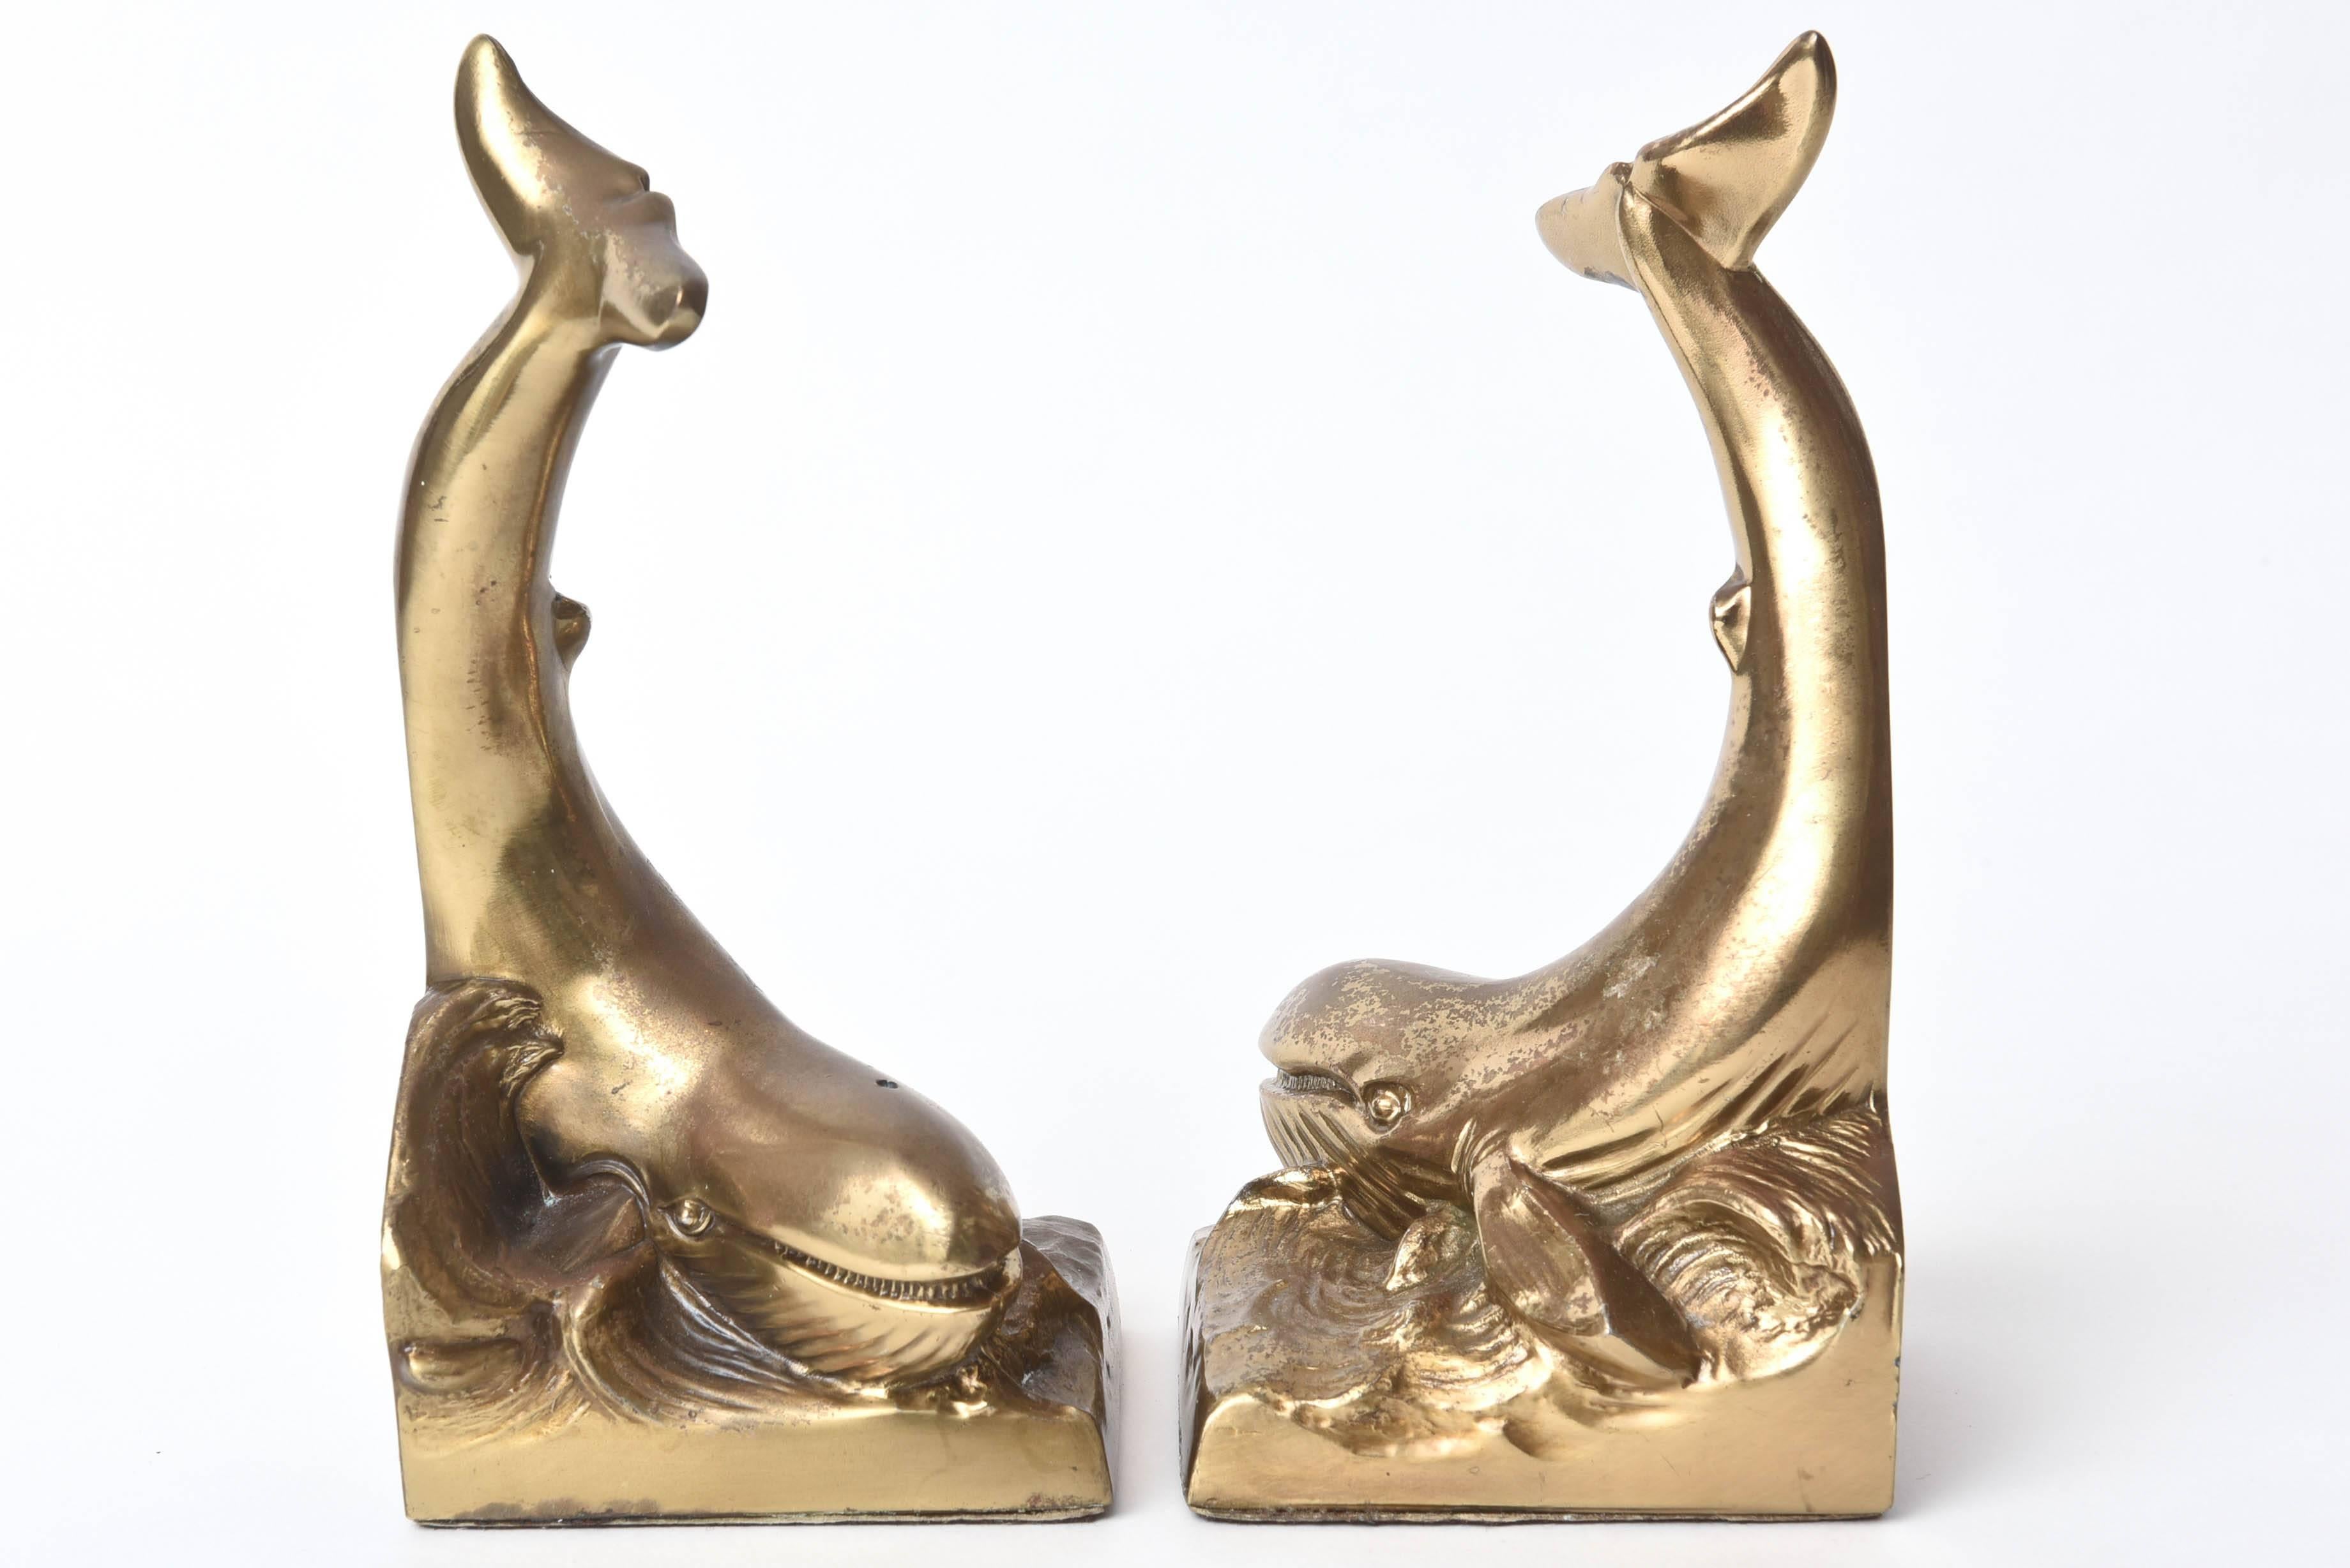 Pair of Whale Bookends, Vintage Brass with Great Detail 1